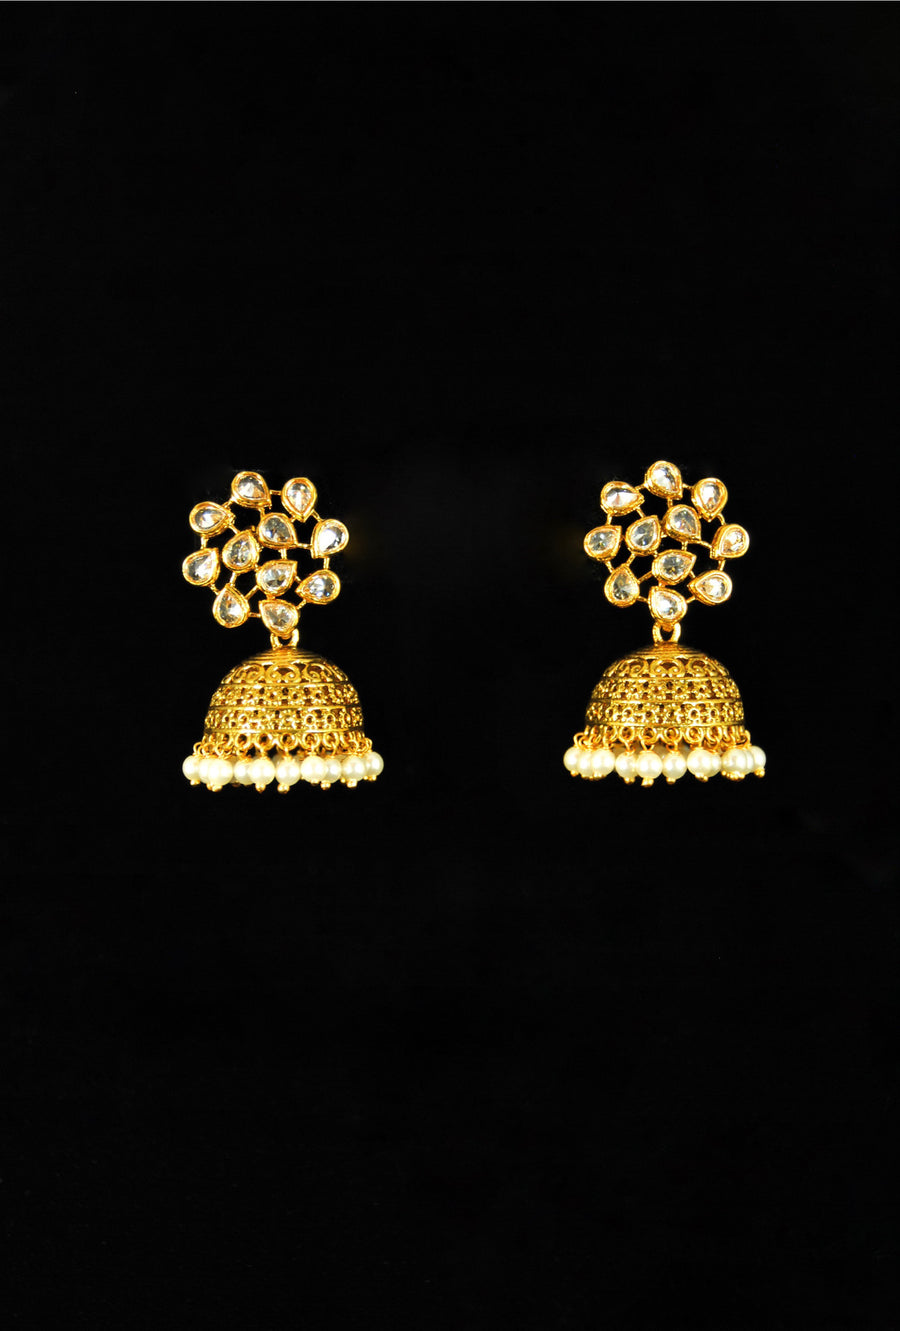 Antique leaf web earrings with pearl drops - Desi Royale